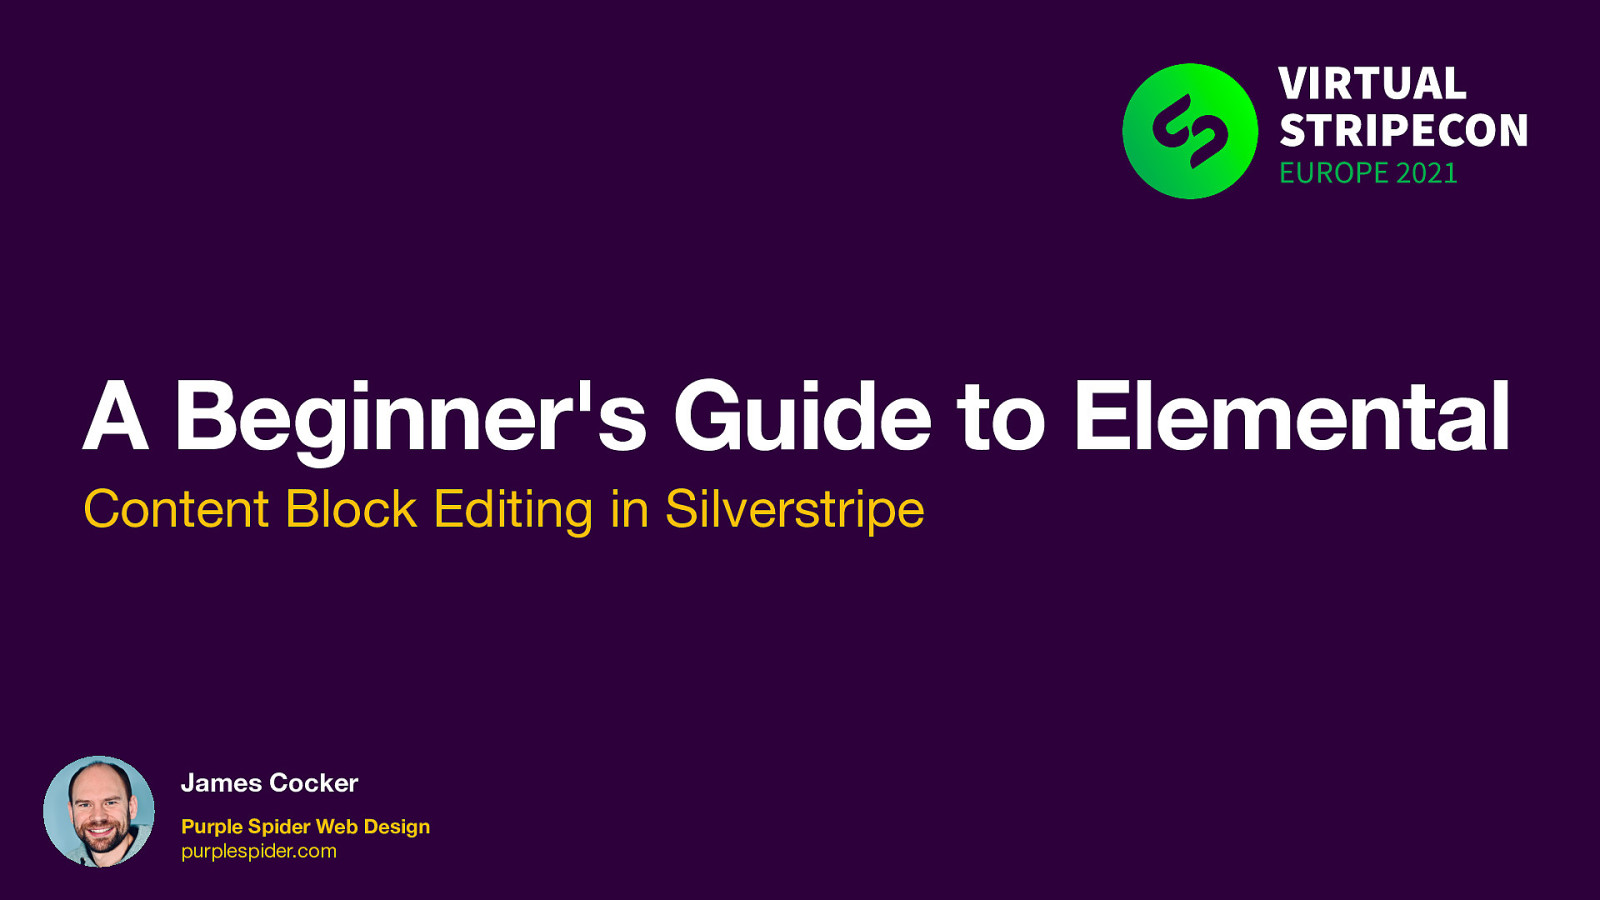 A Beginner’s Guide to Elemental: Content Block Editing in Silverstripe